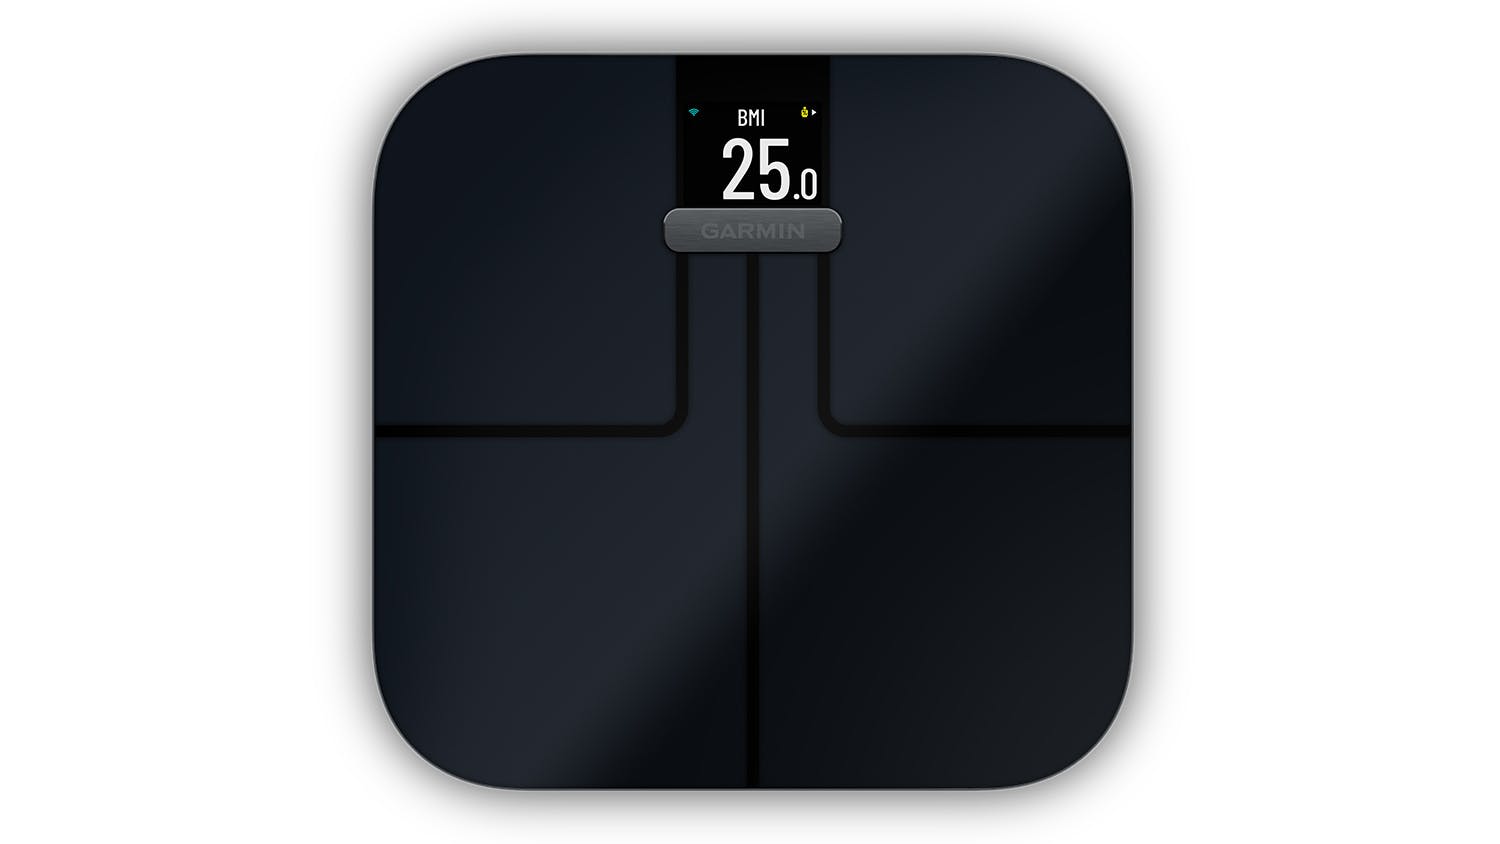 Garmin Index S2, Smart Scale with Wireless Connectivity, Measure Body Fat,  Muscle, Bone Mass, Body Water and More-White With Accessories 